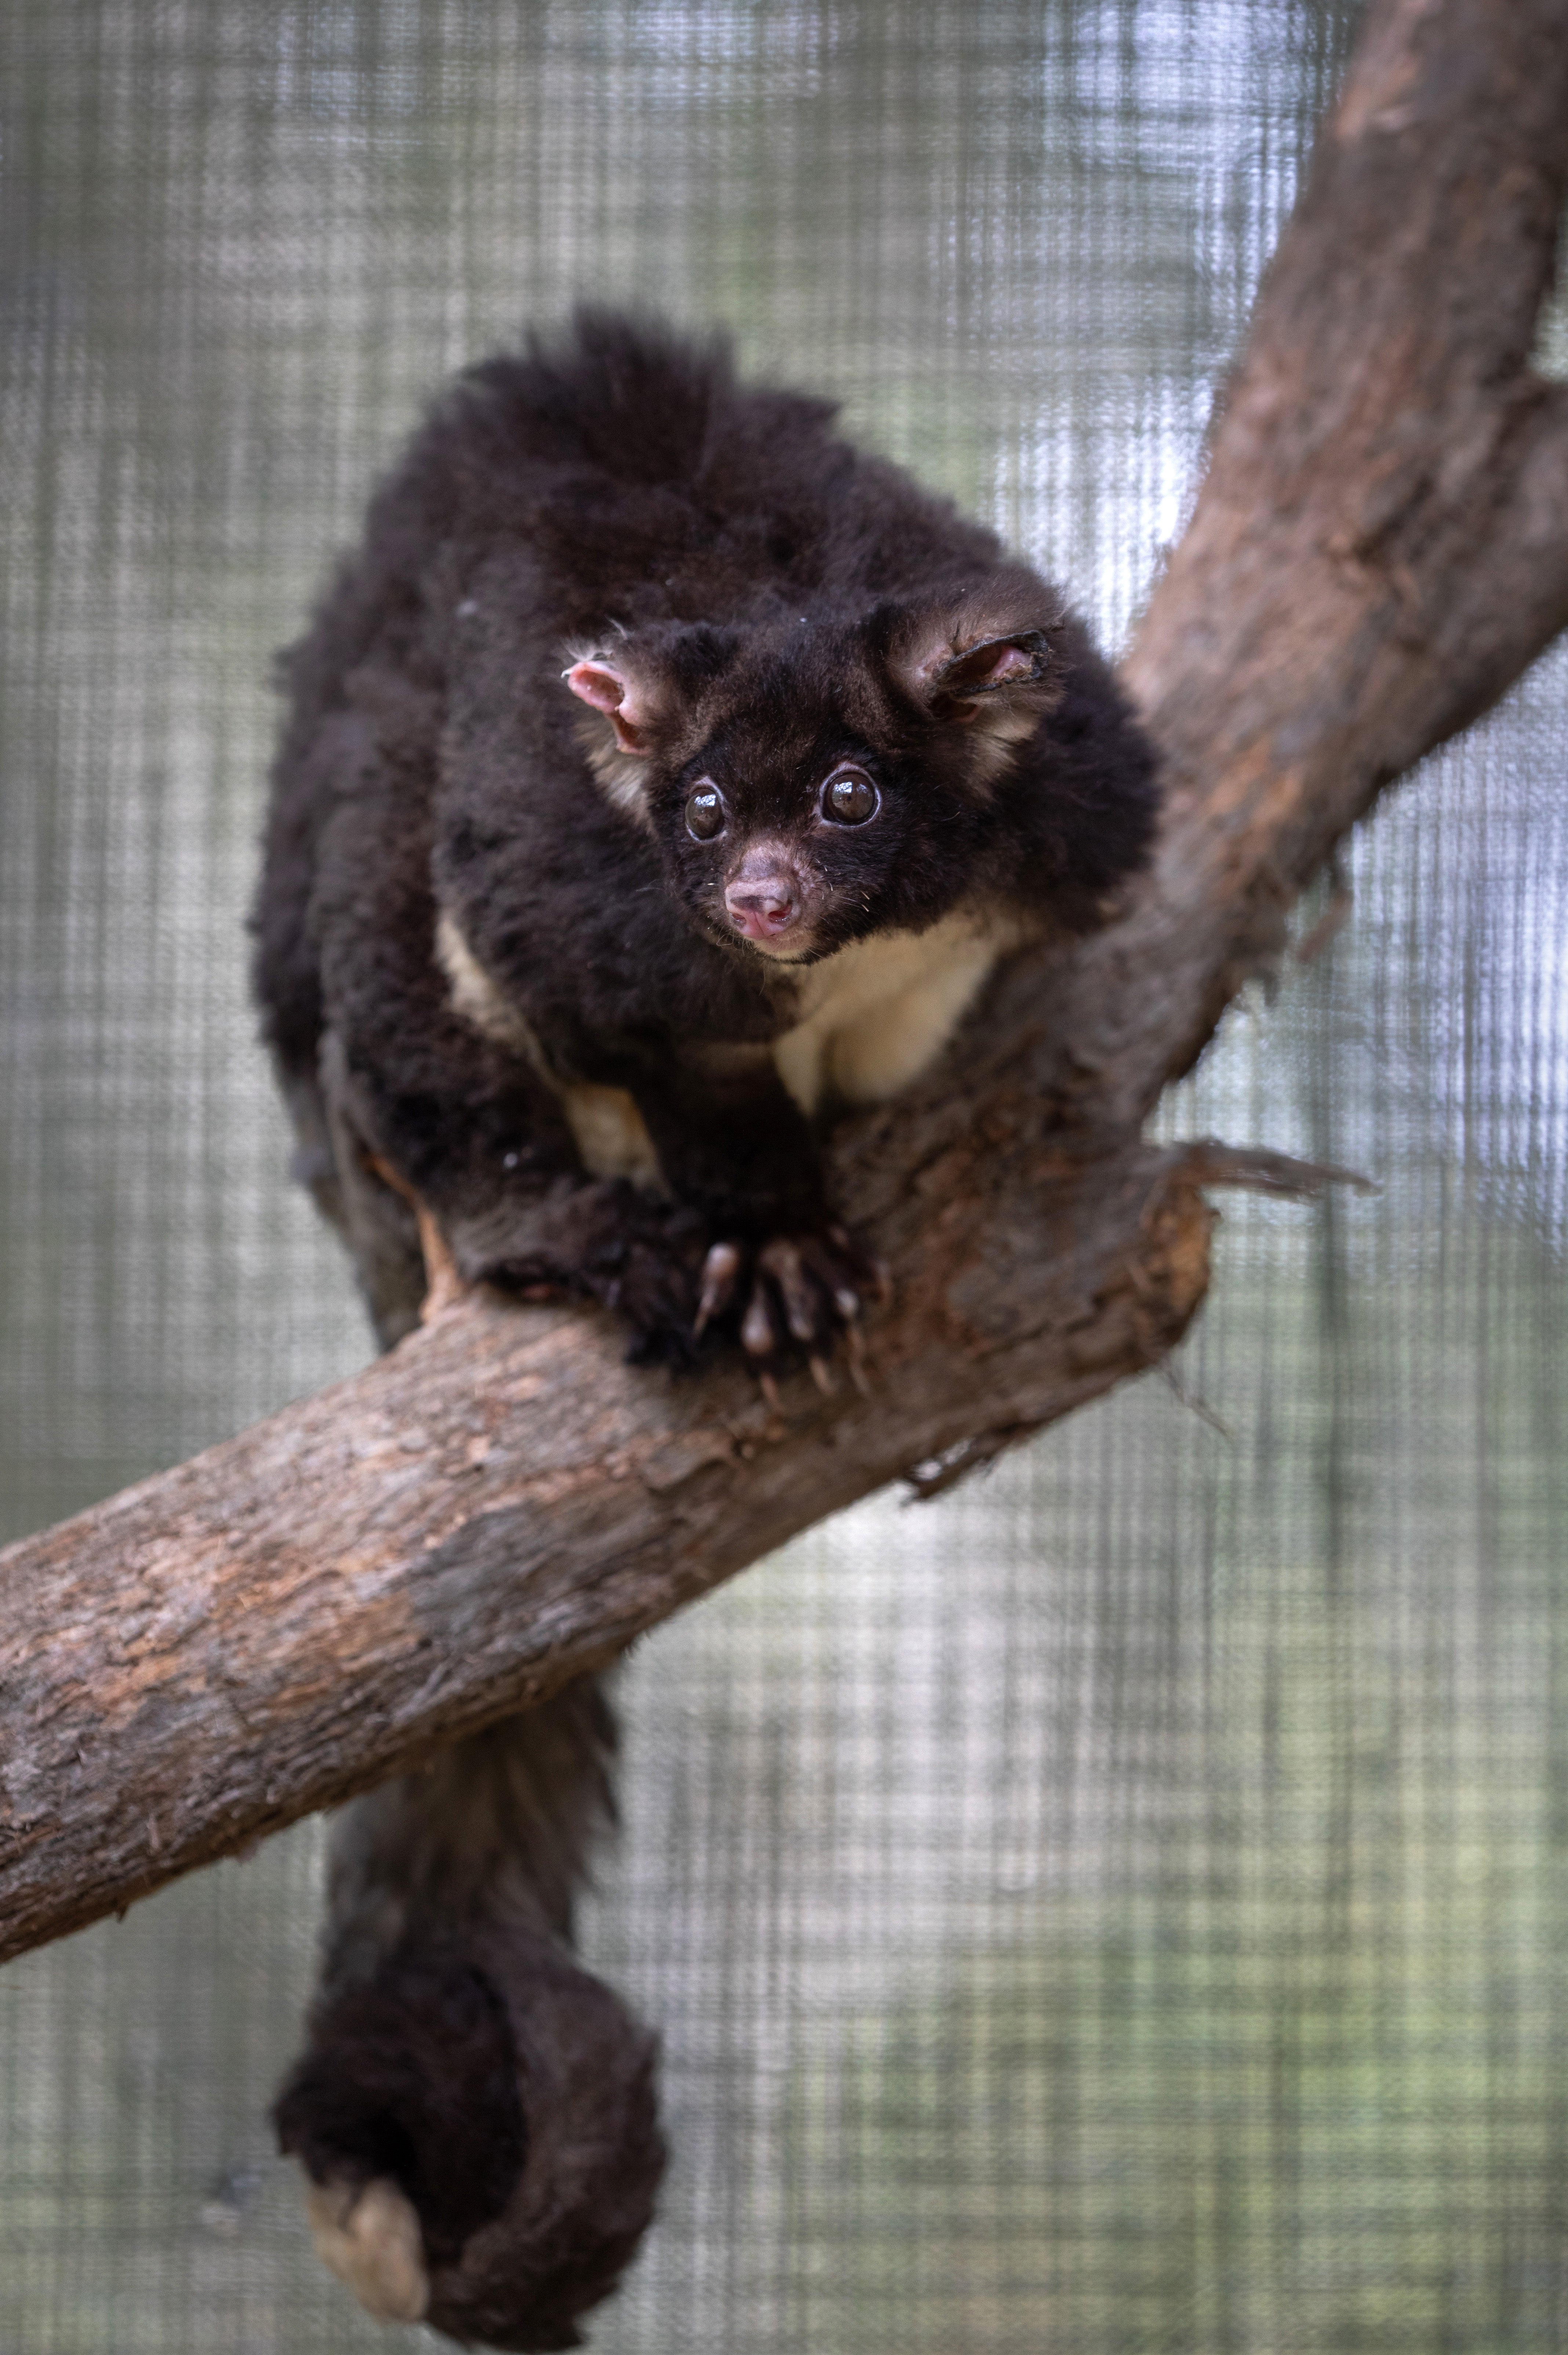 Representational: A rehabilitated greater glider possum prepares to be returned to the wild from the Higher Ground Raptor Center on 28 January 2020 in Bomaderry, Australia